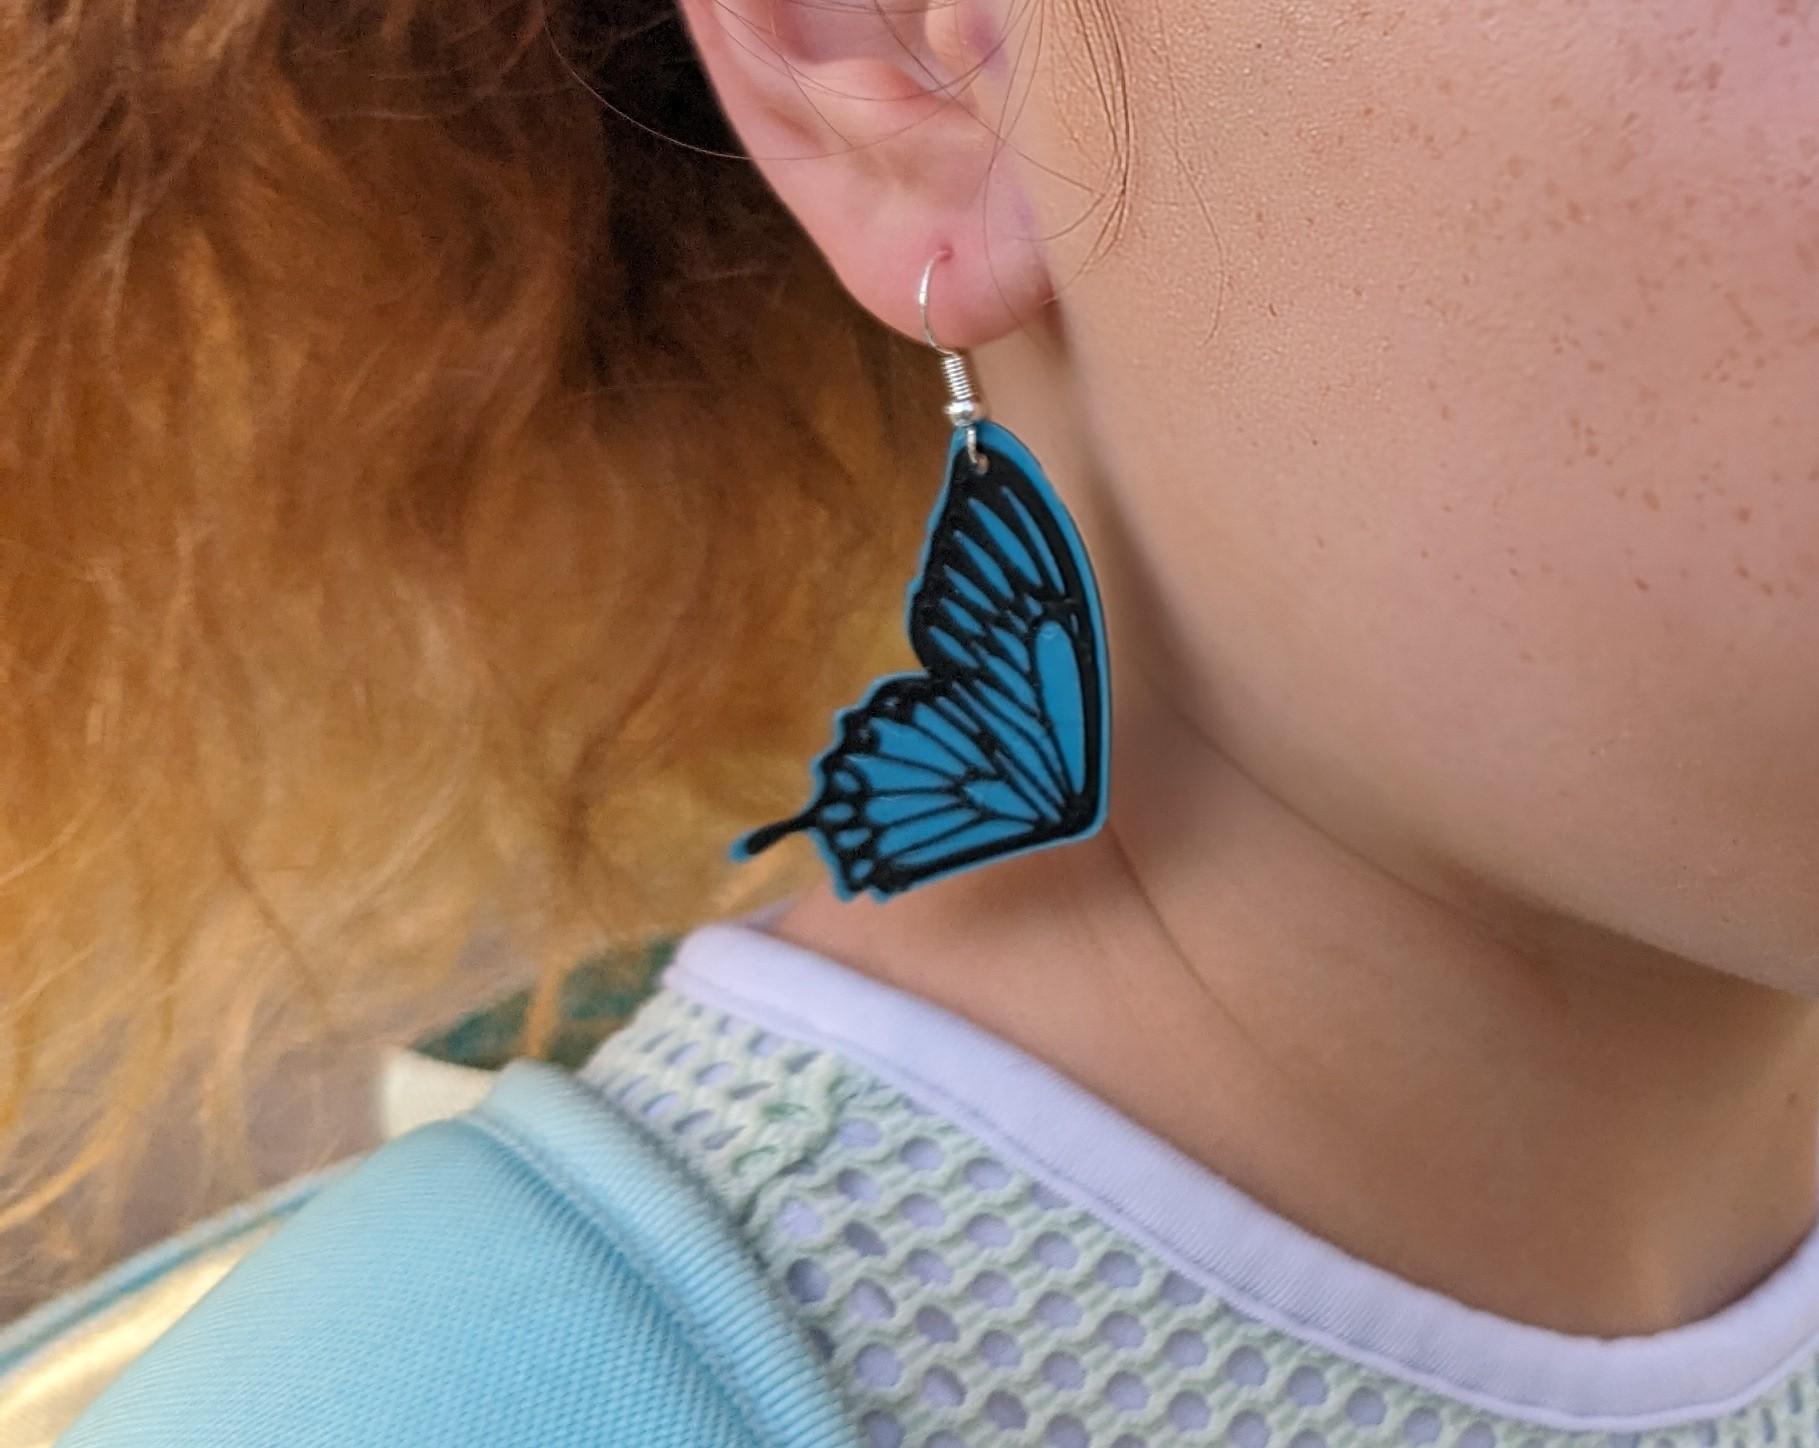 Filament change two-color butterfly wing earrings, no abs, hole for post included, monarch 3d model